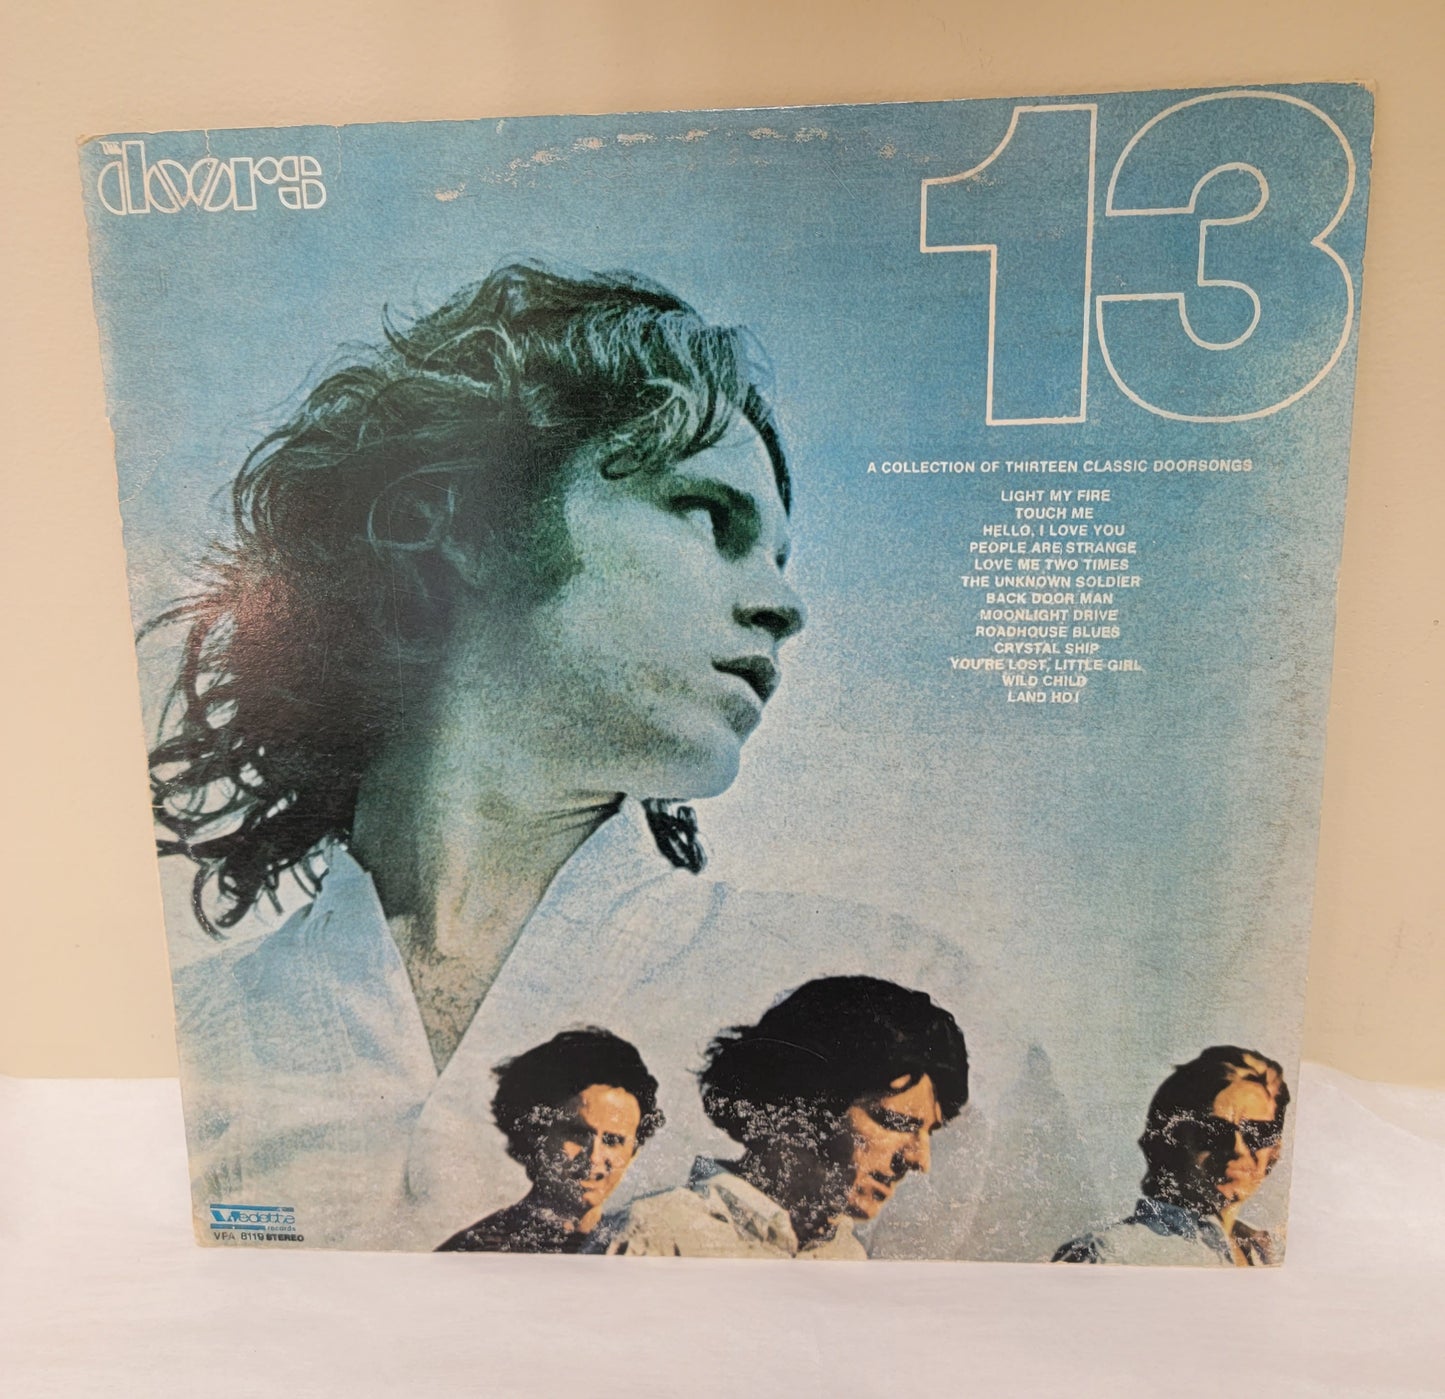 The Doors "13" Psychedelic Rock 1970  Compilation Record Album (Italy Import)